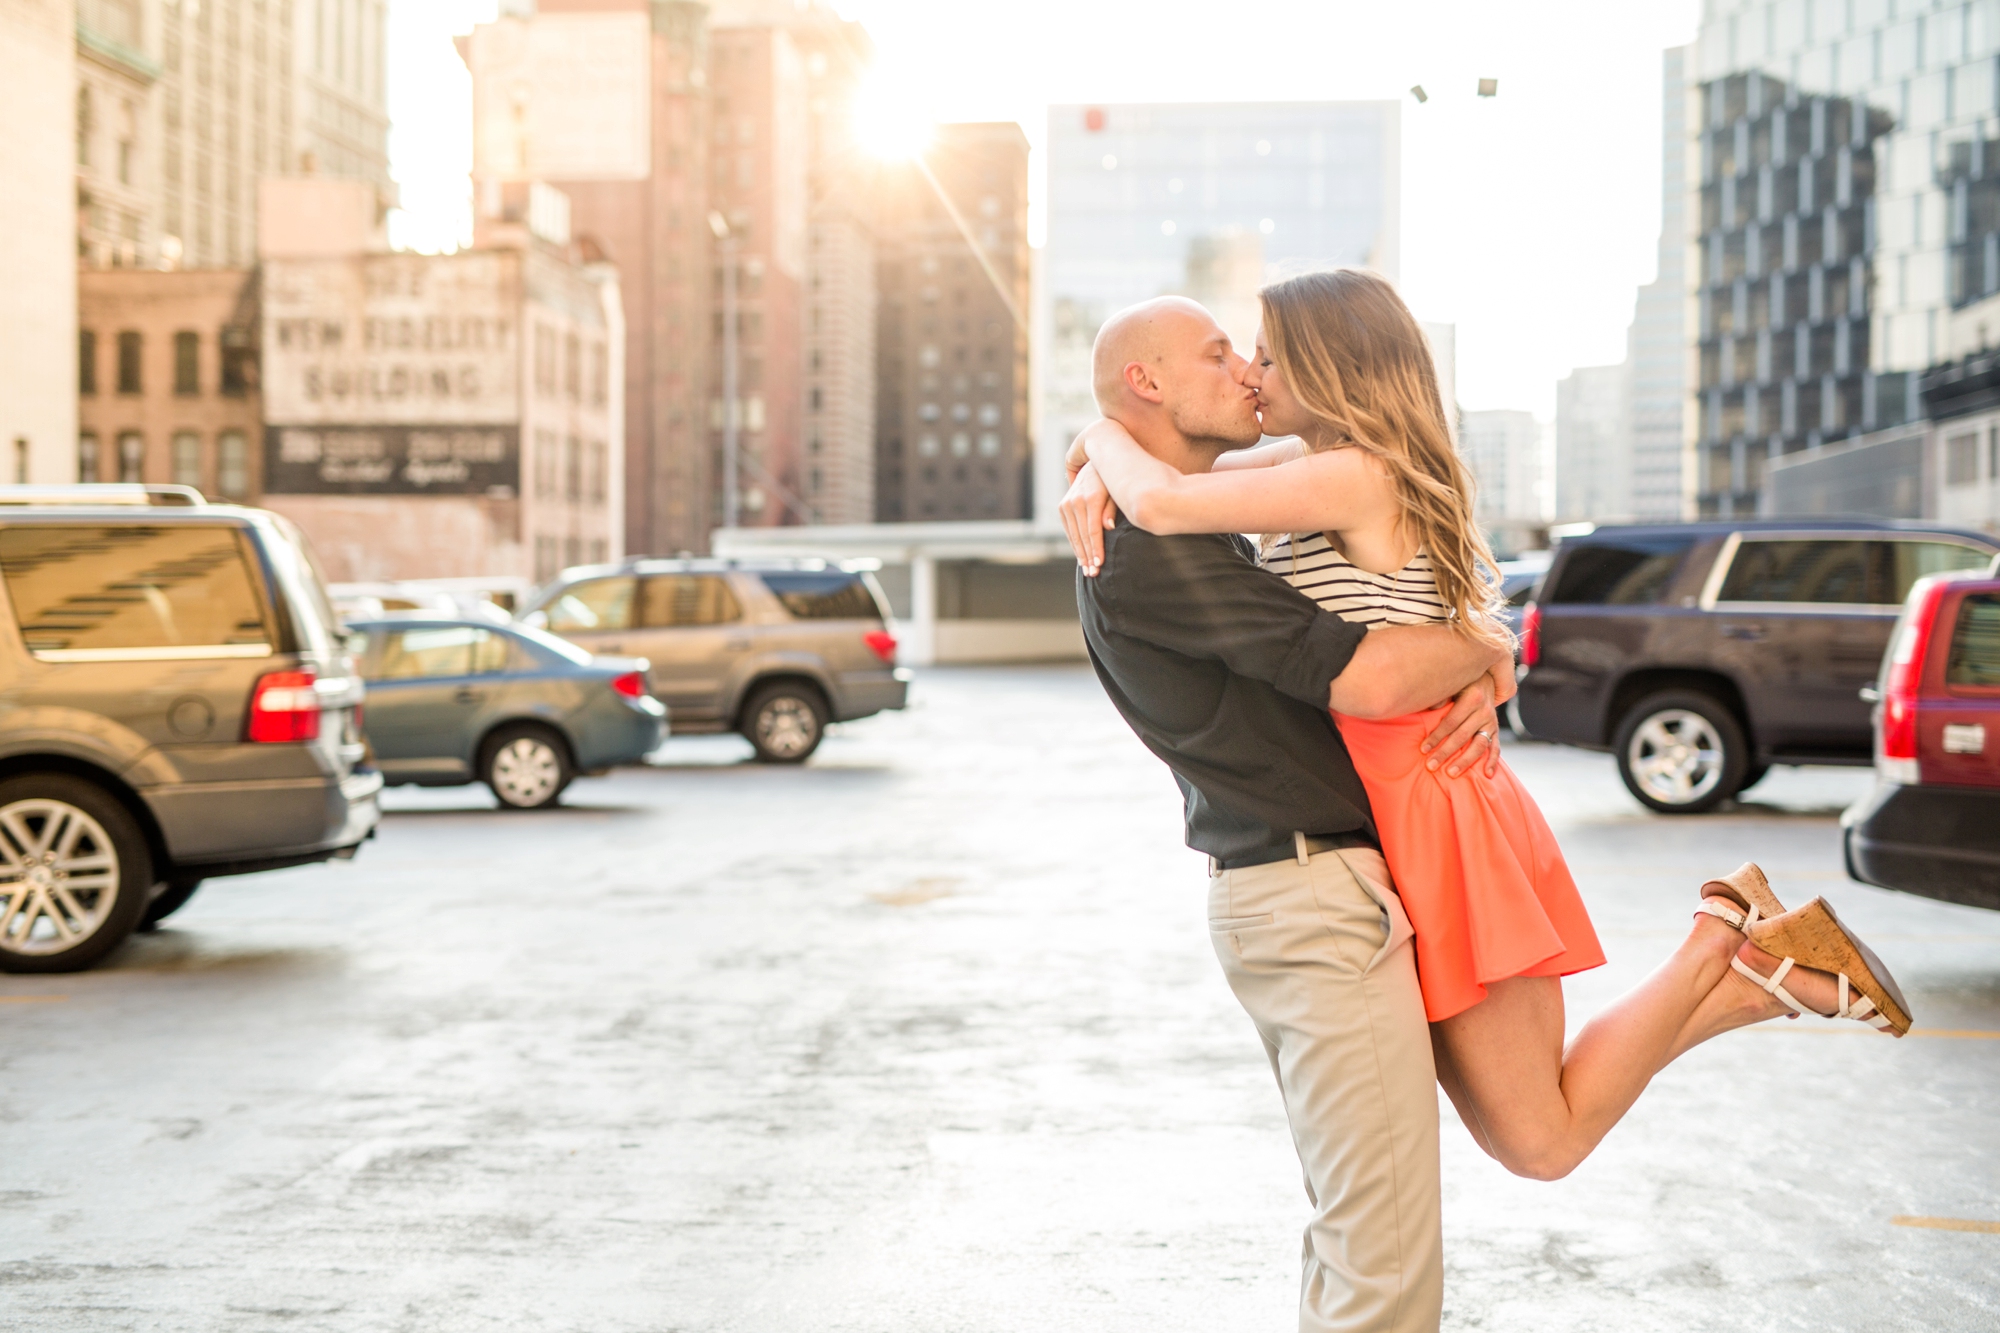 downtown pittsburgh engagement photos, downtown pittsburgh engagement pictures, pittsburgh wedding photographer, downtown pittsburgh wedding photographer